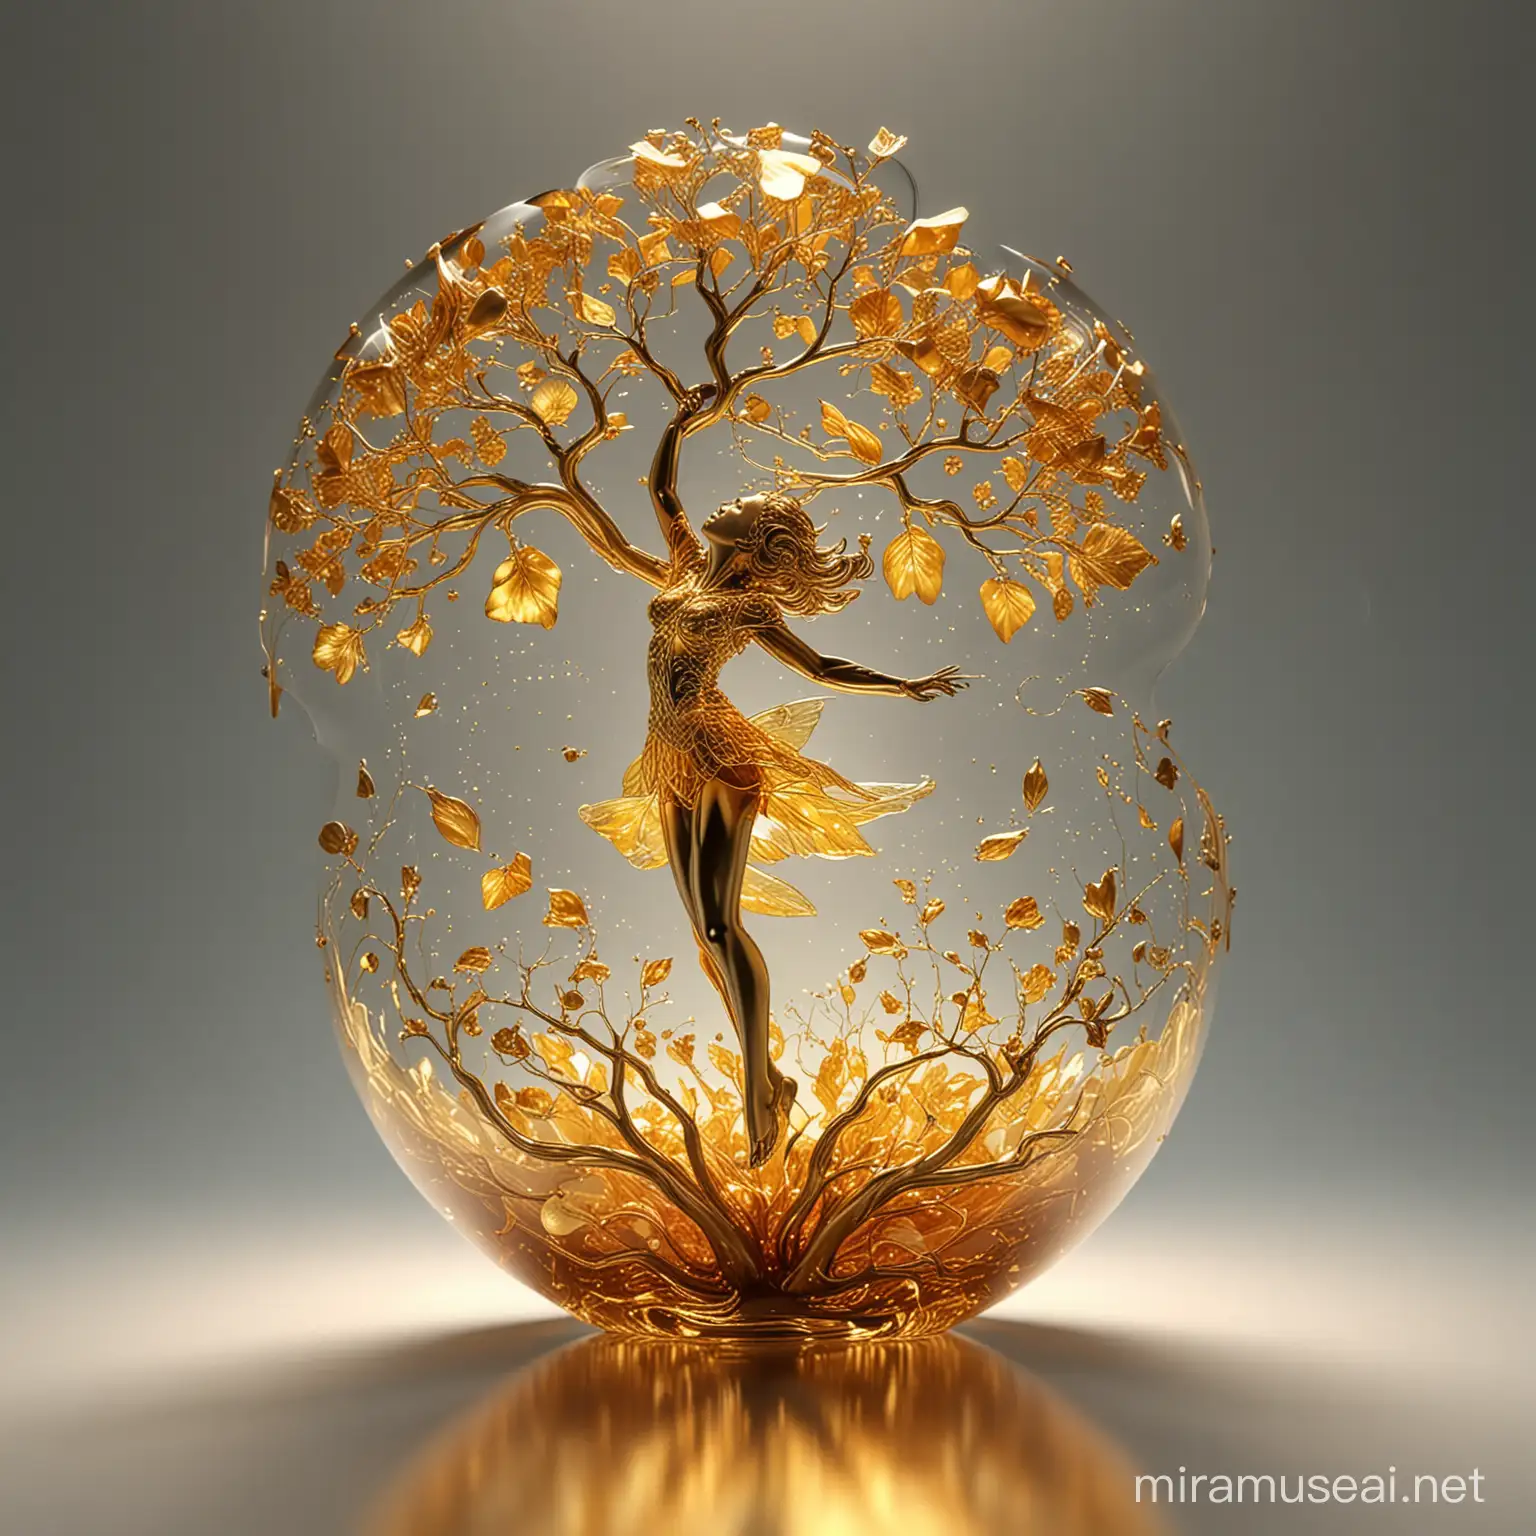 Surreal Glass Apple Transformation by Glowing Fairy Windy Petals and Swirling Ribbons